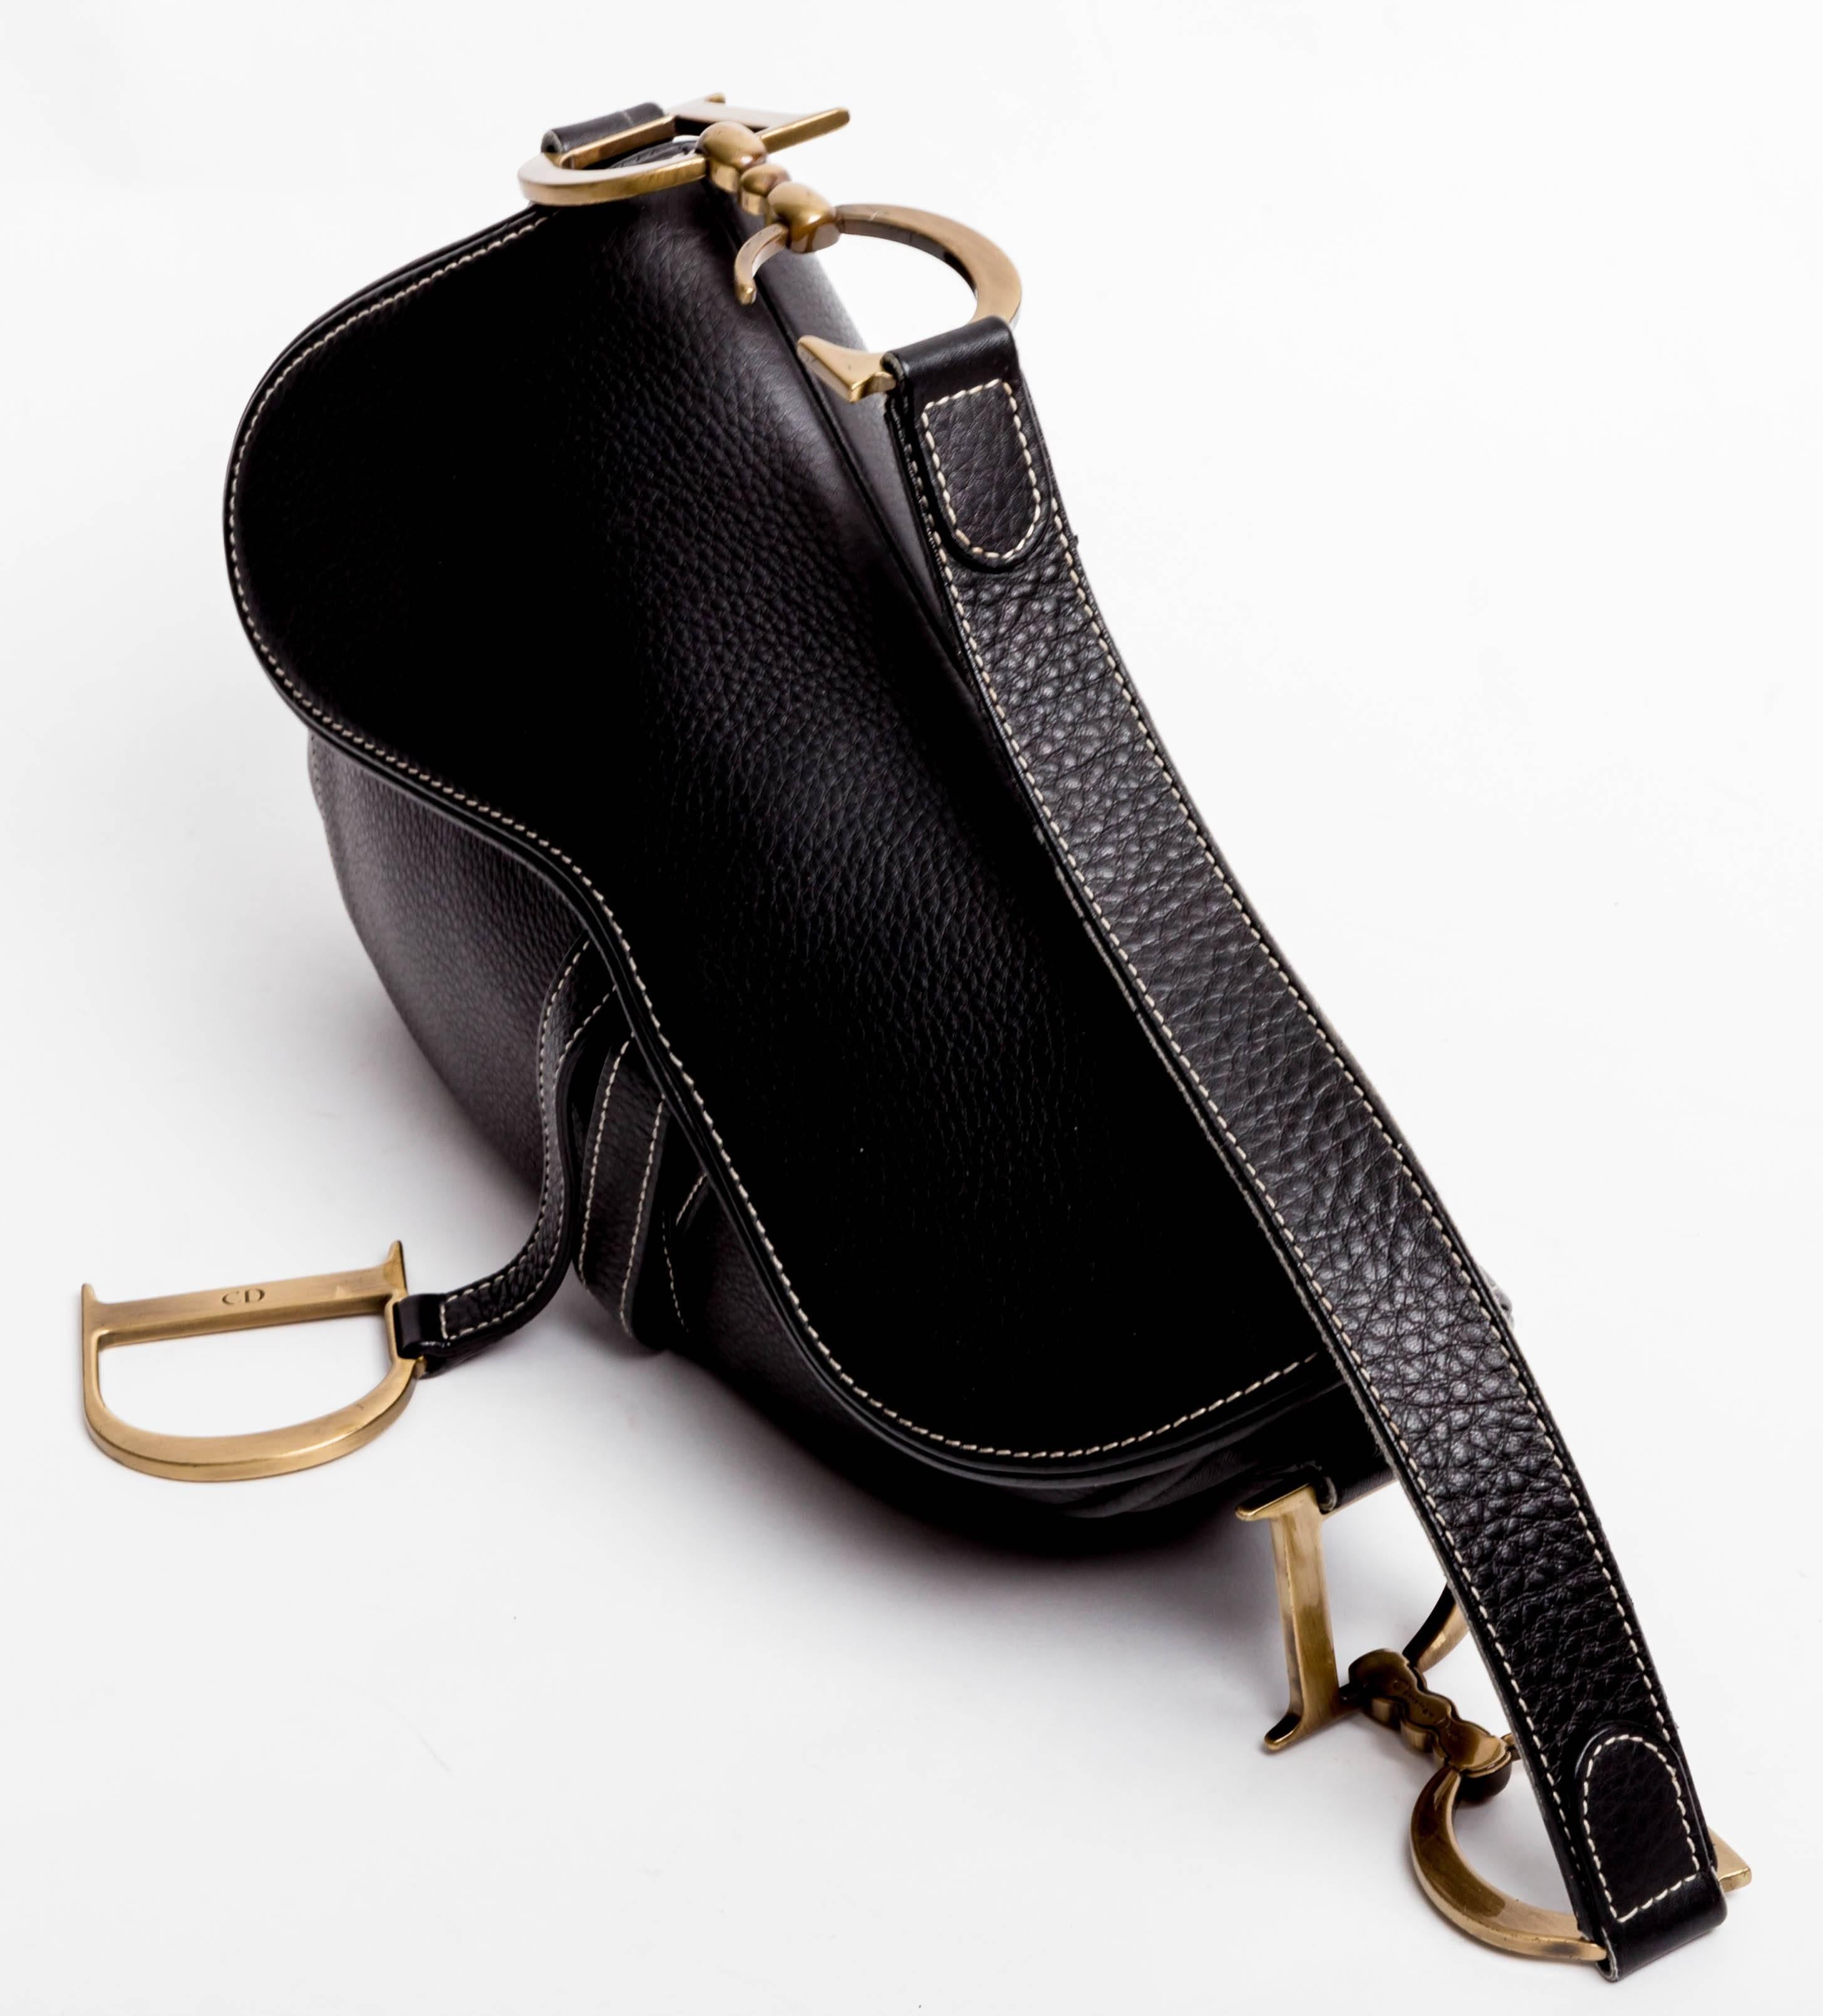 Iconic  Christian Dior Saddle Bag in Black Leather. Closes with an invisible velcro fastening. Condition is excellent both inside and out. One inside zip pocket.